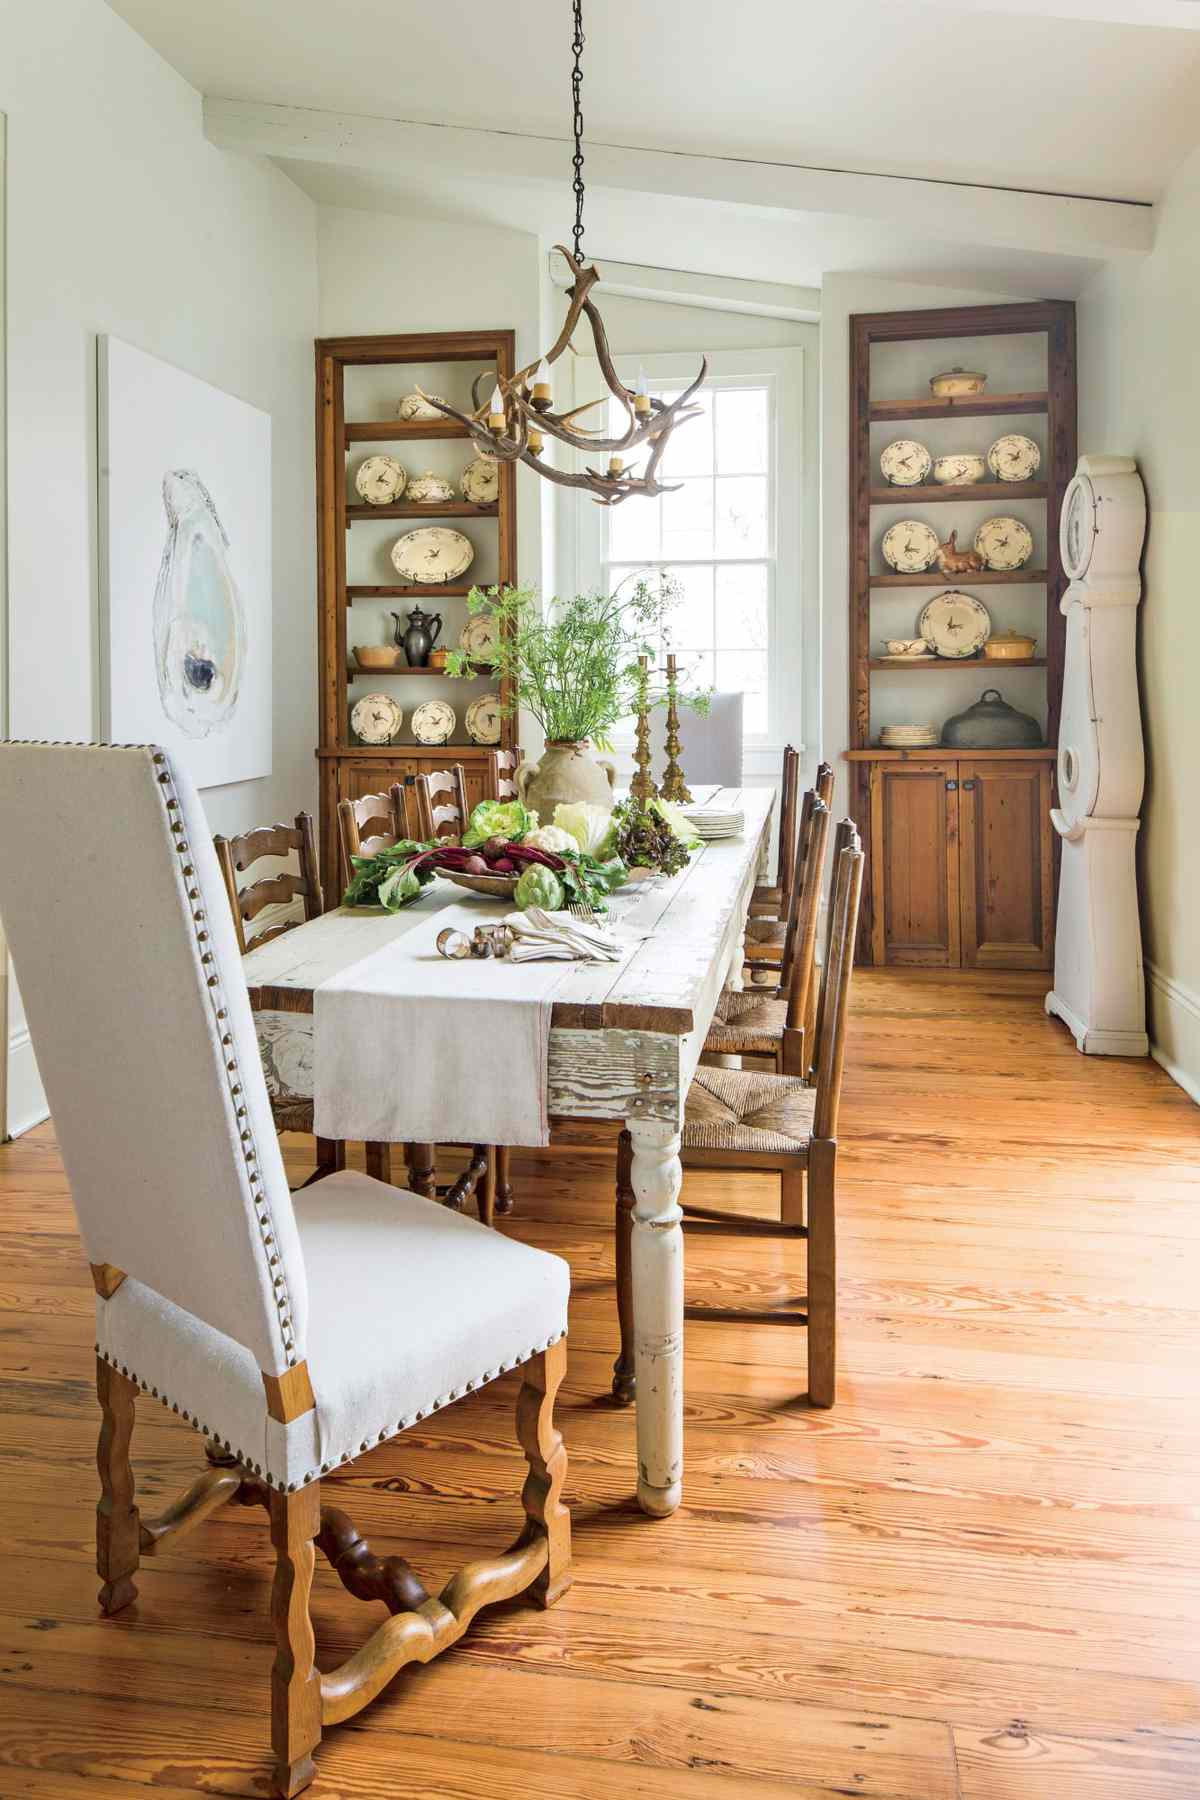 Stylish Dining Room Decorating Ideas   Southern Living